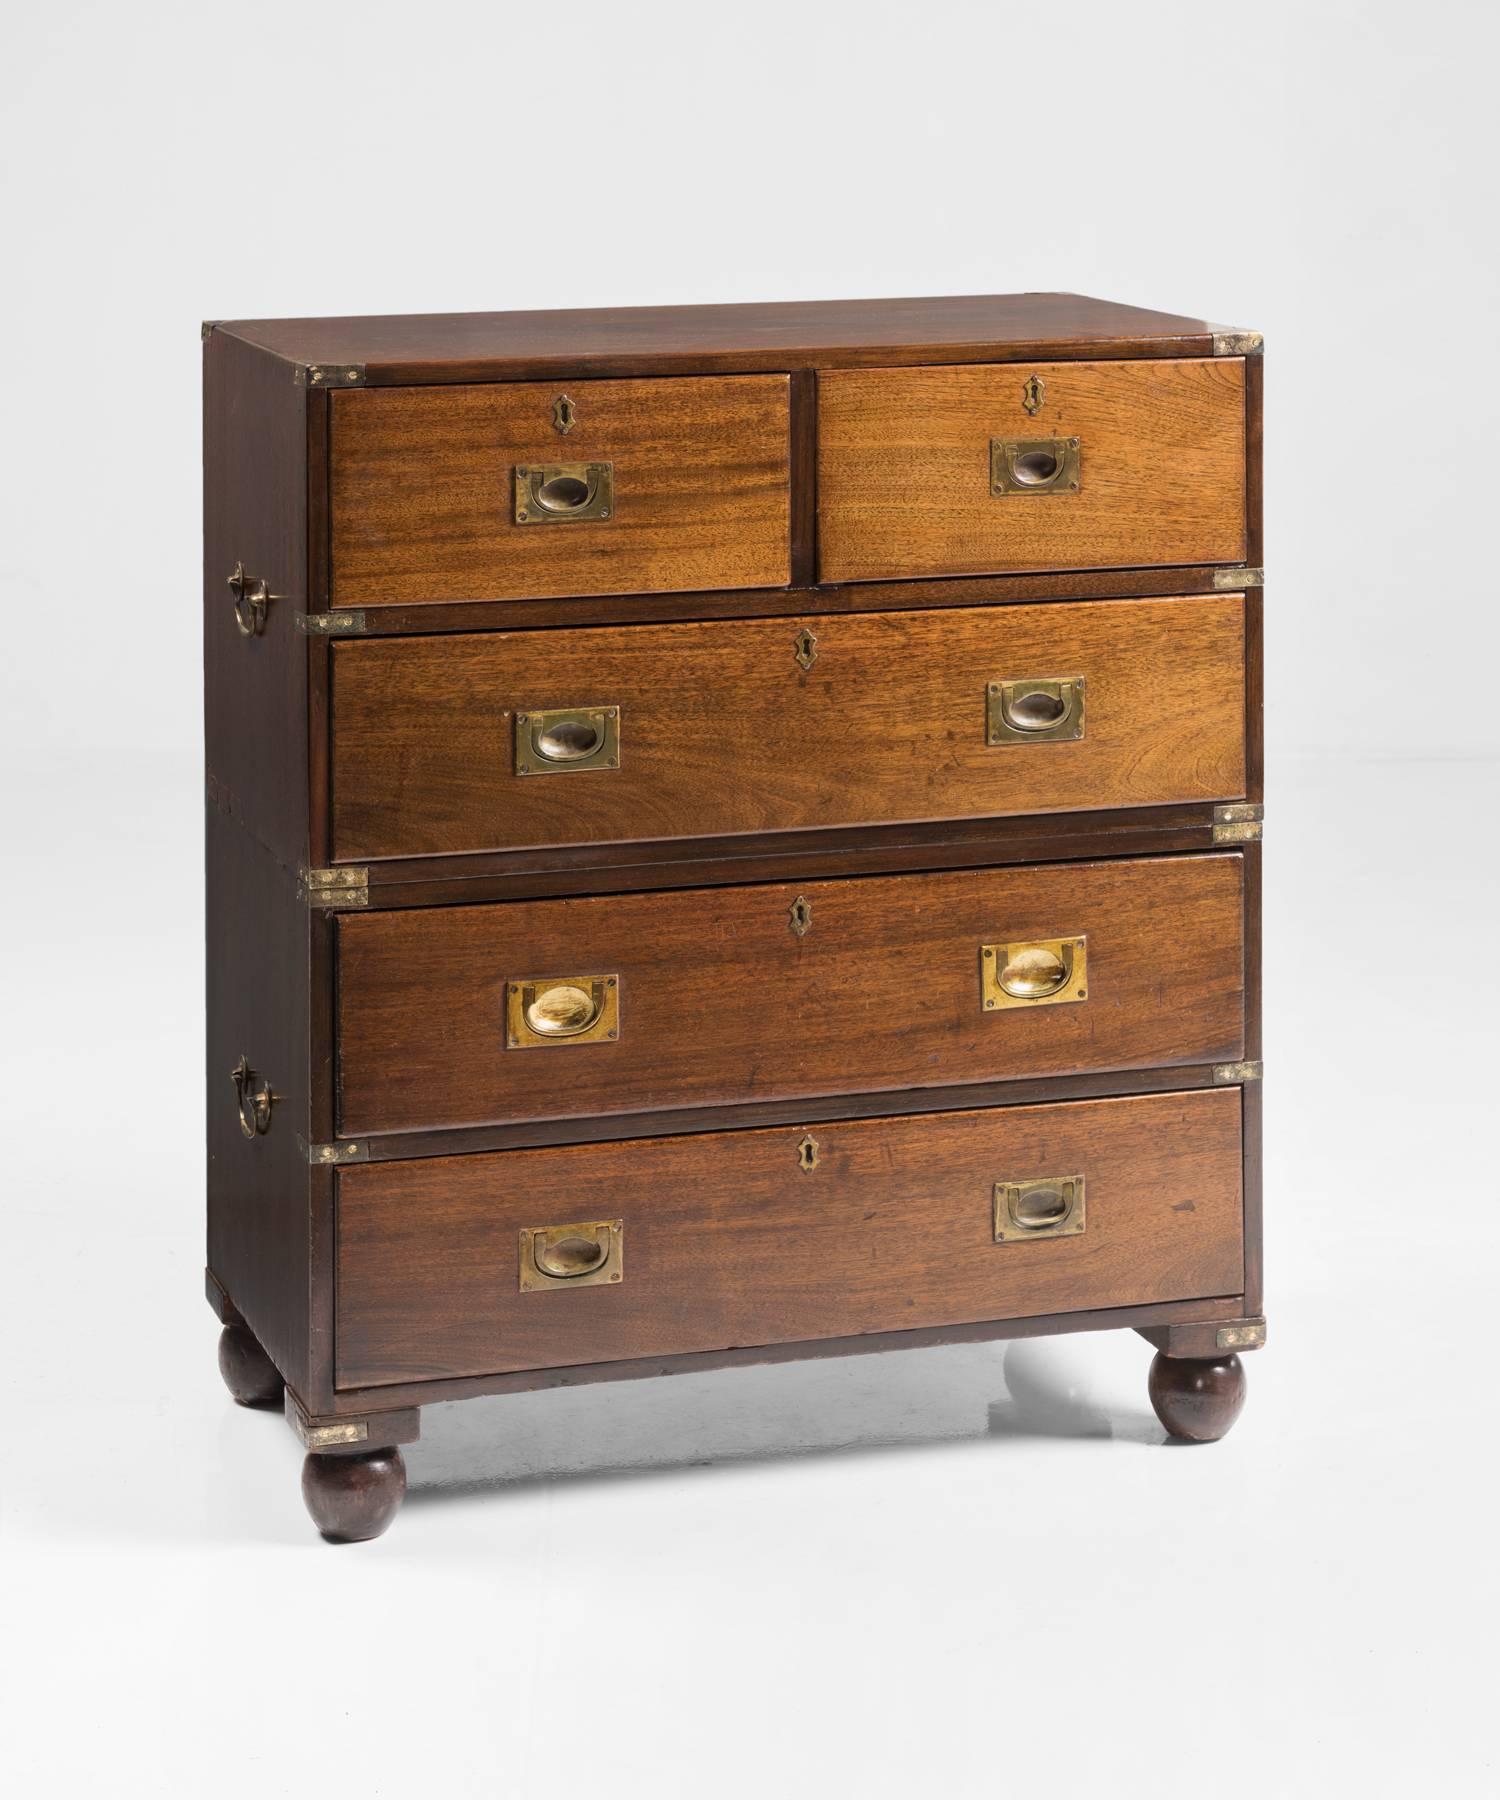 Campaign Chest of Drawers, England, circa 1930

Polished mahogany with brass hardware, on bun feet.